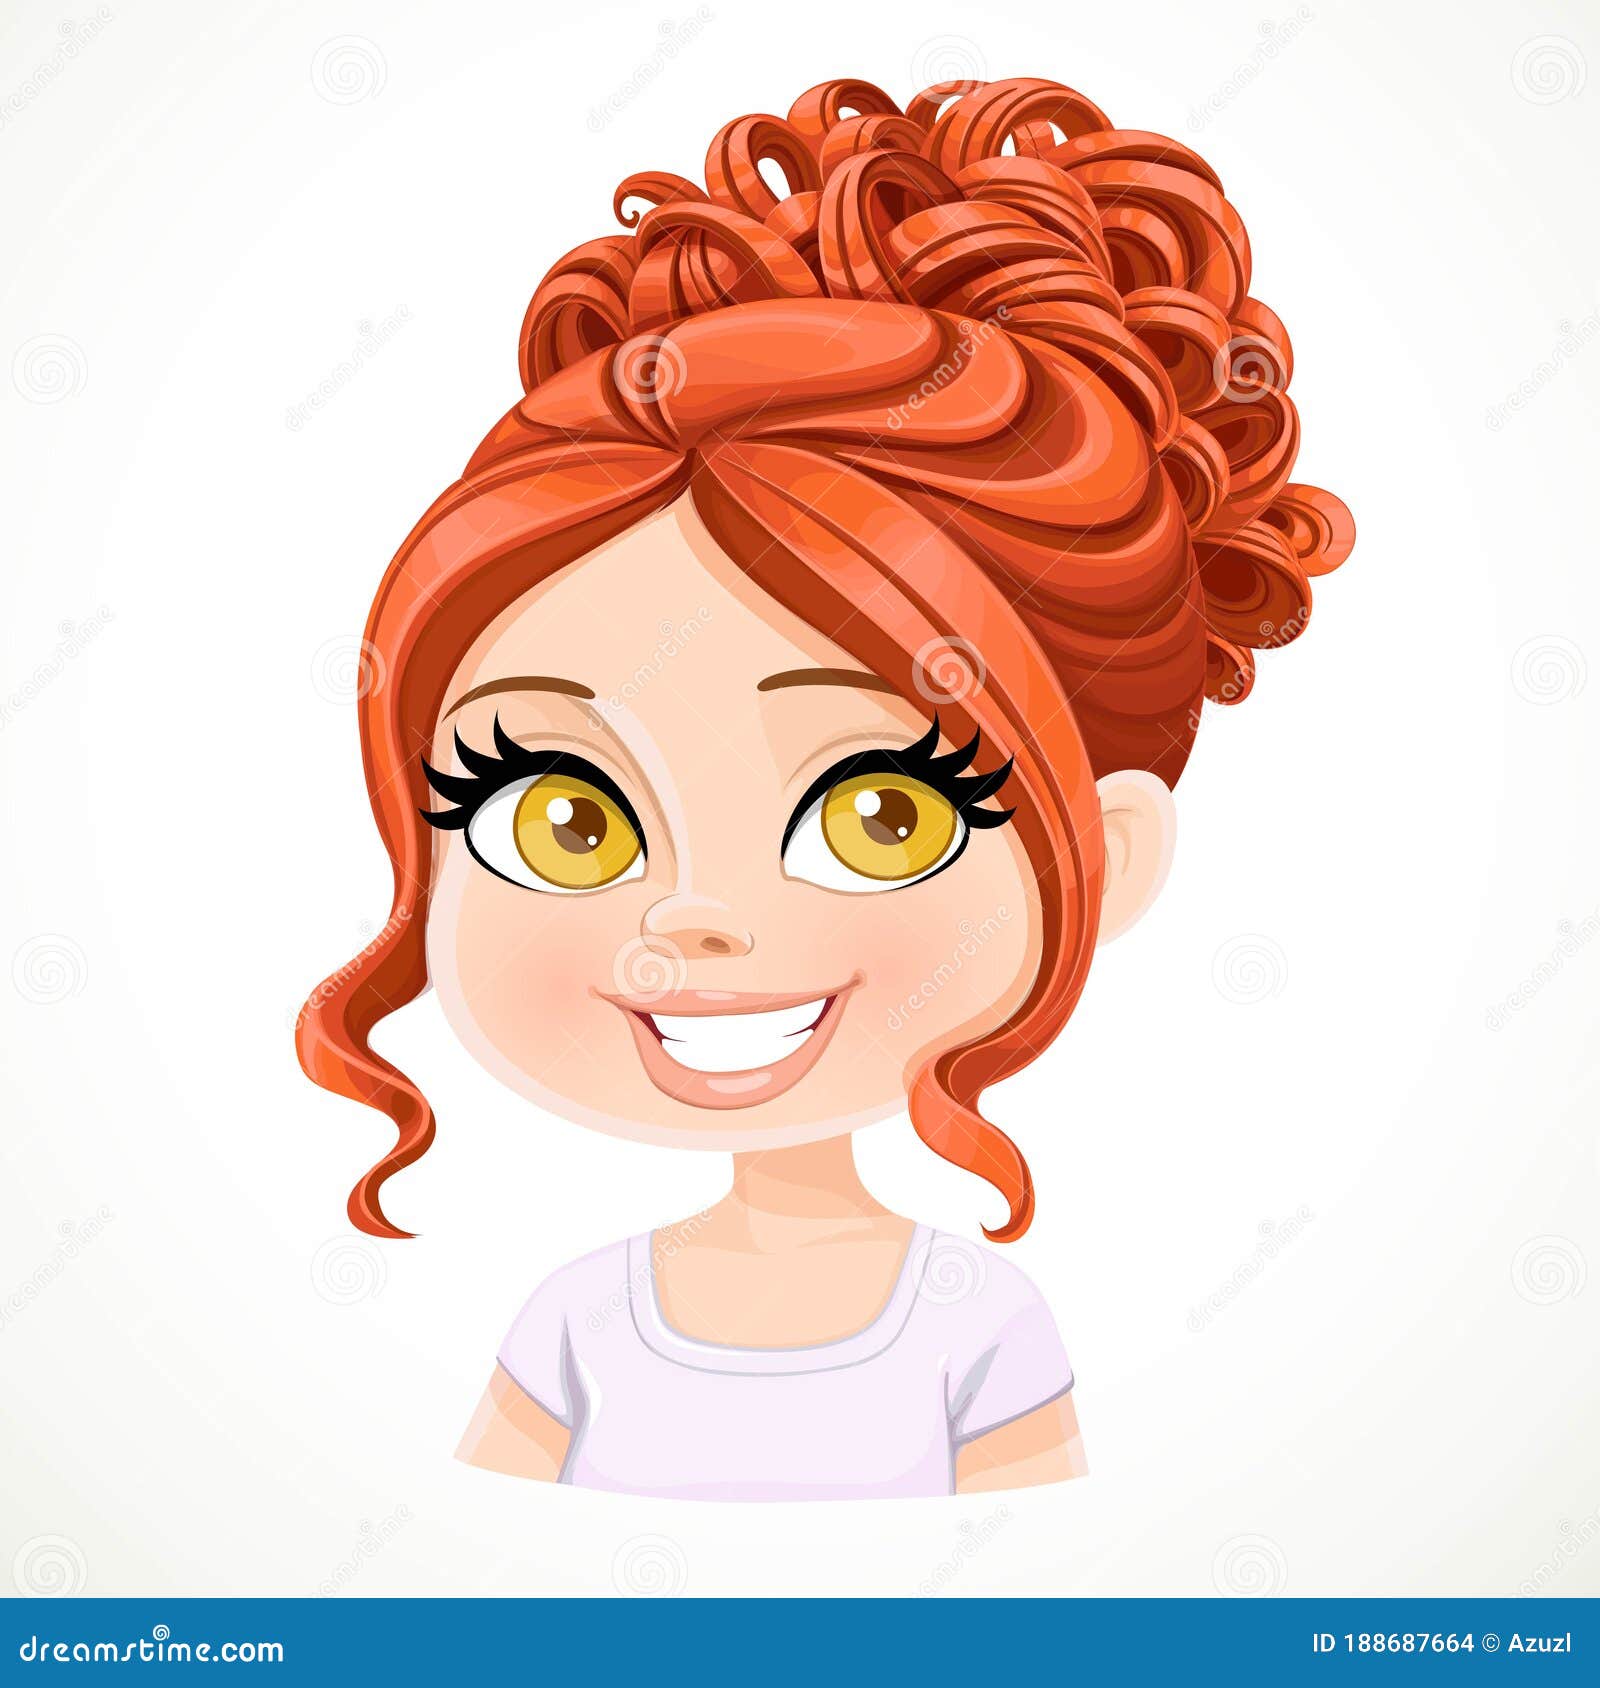 Beautiful Brunette Girl with Red Hair Arranged in a High Evening Hairstyle  Portrait Stock Illustration - Illustration of fashion, drawing: 188687664